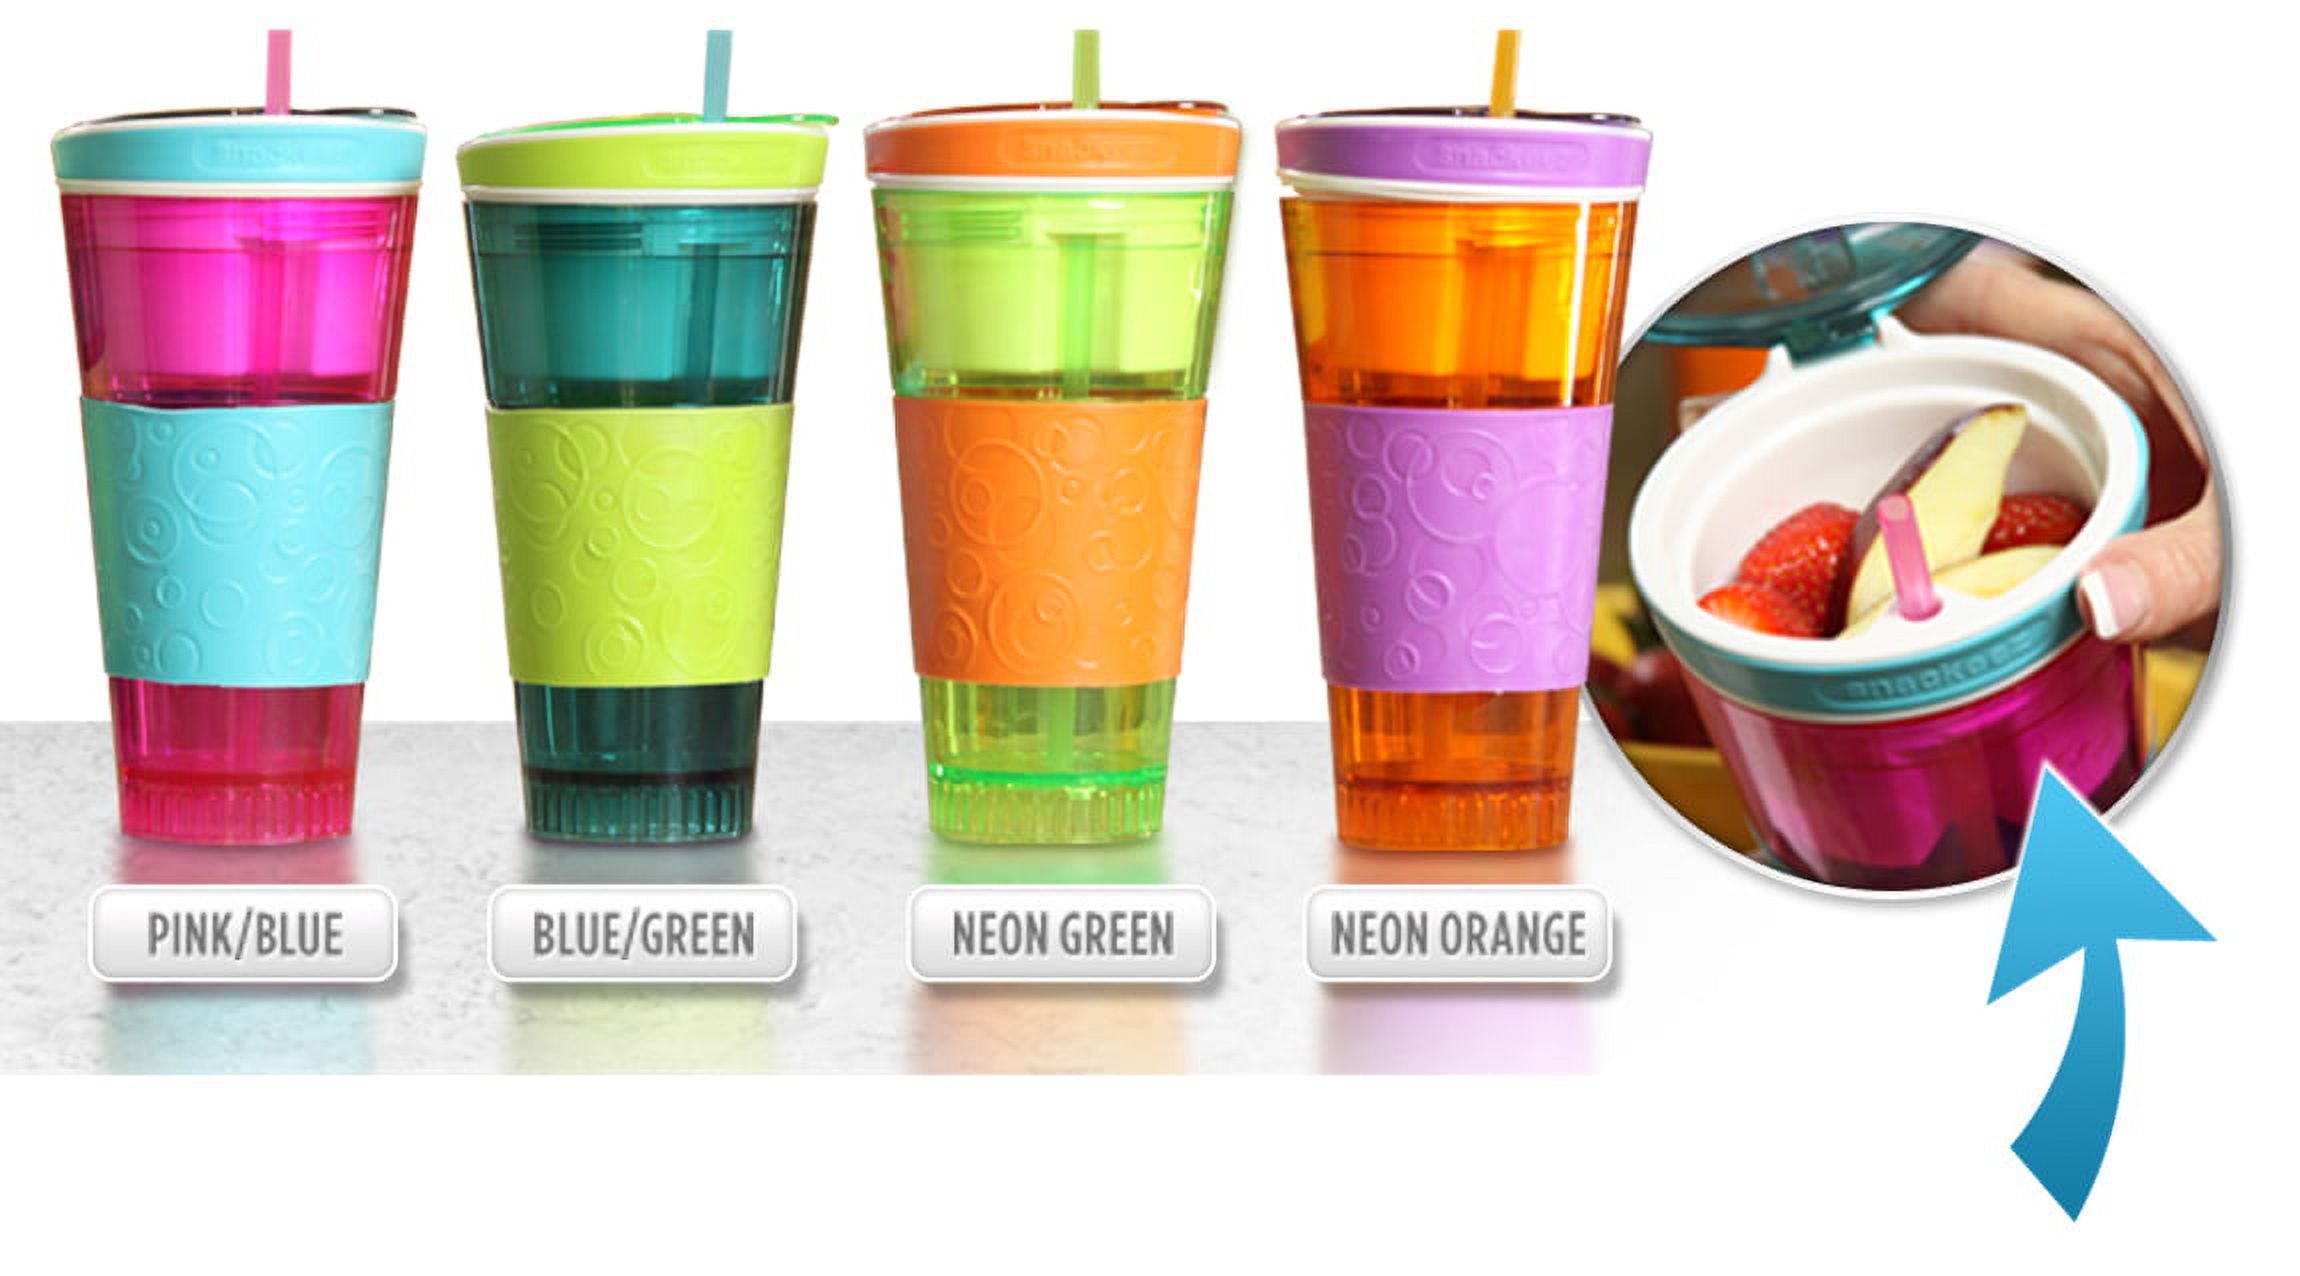 Snackeez Plastic 2 in 1 Snack & Drink Cup One Cup Assorted Colors - image 5 of 6